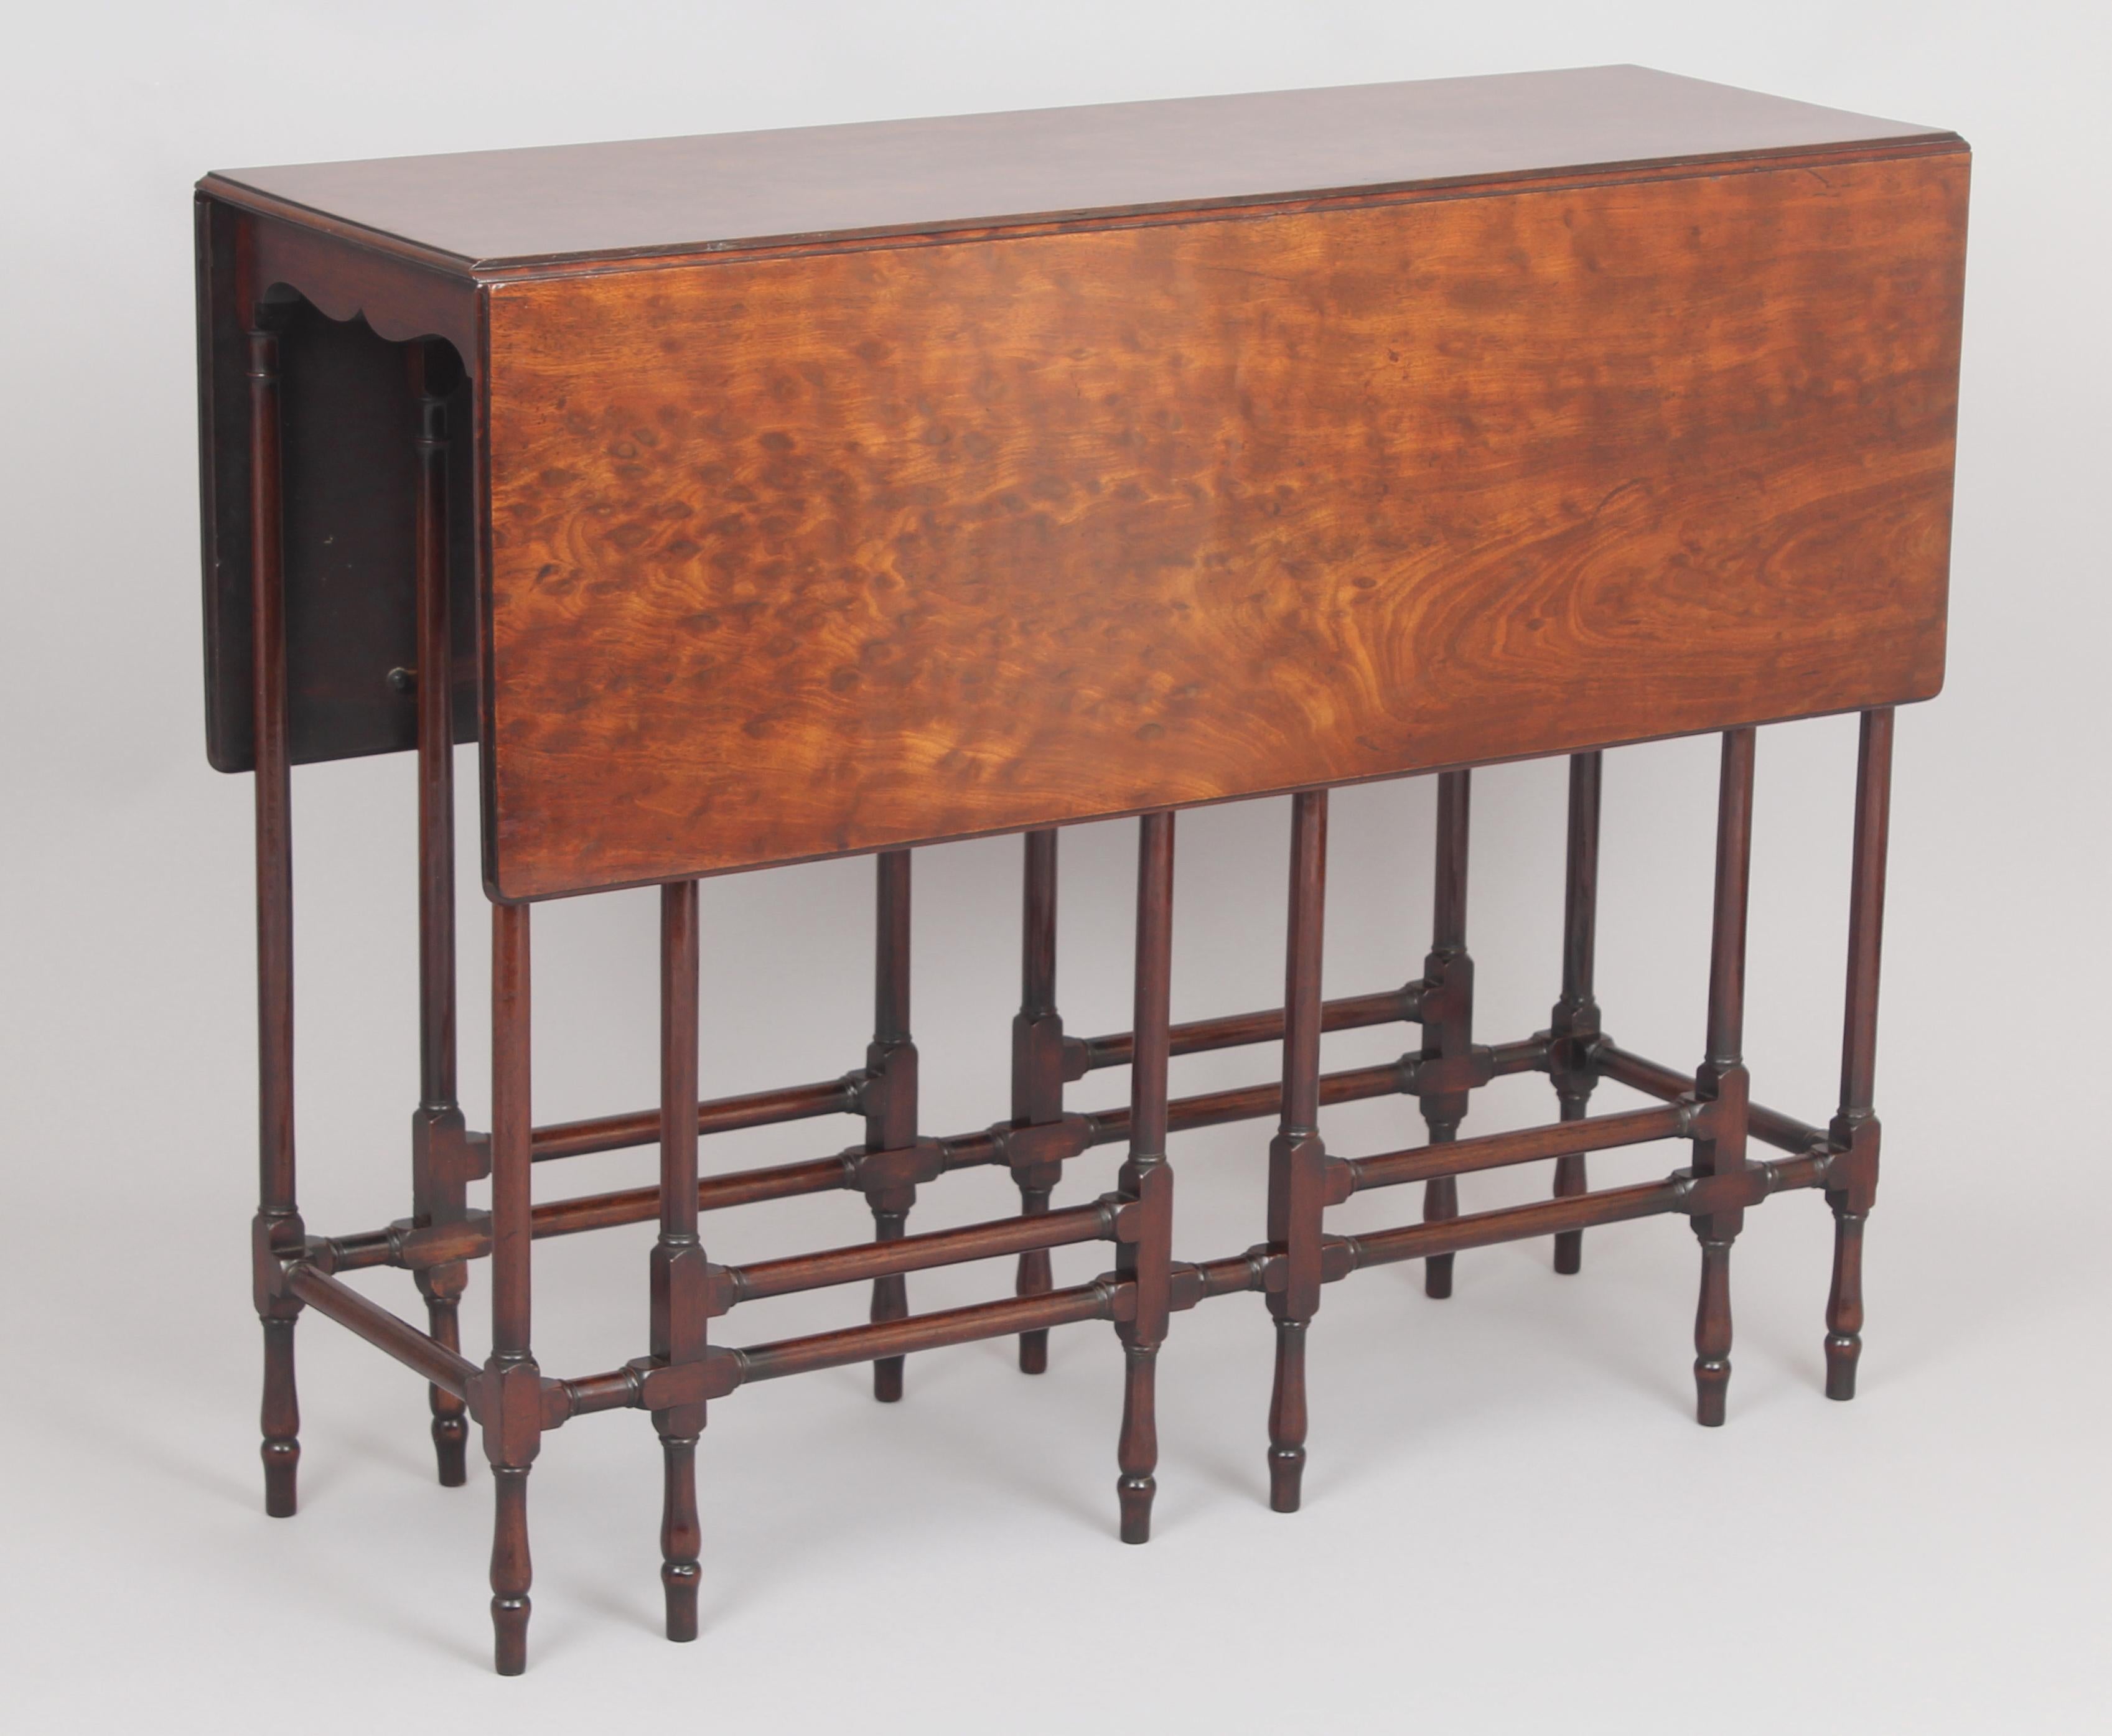 Fine George III period mahogany spider-leg drop-leaf table; the well-figured and patinated top on a double gate frame with slender turned rails.